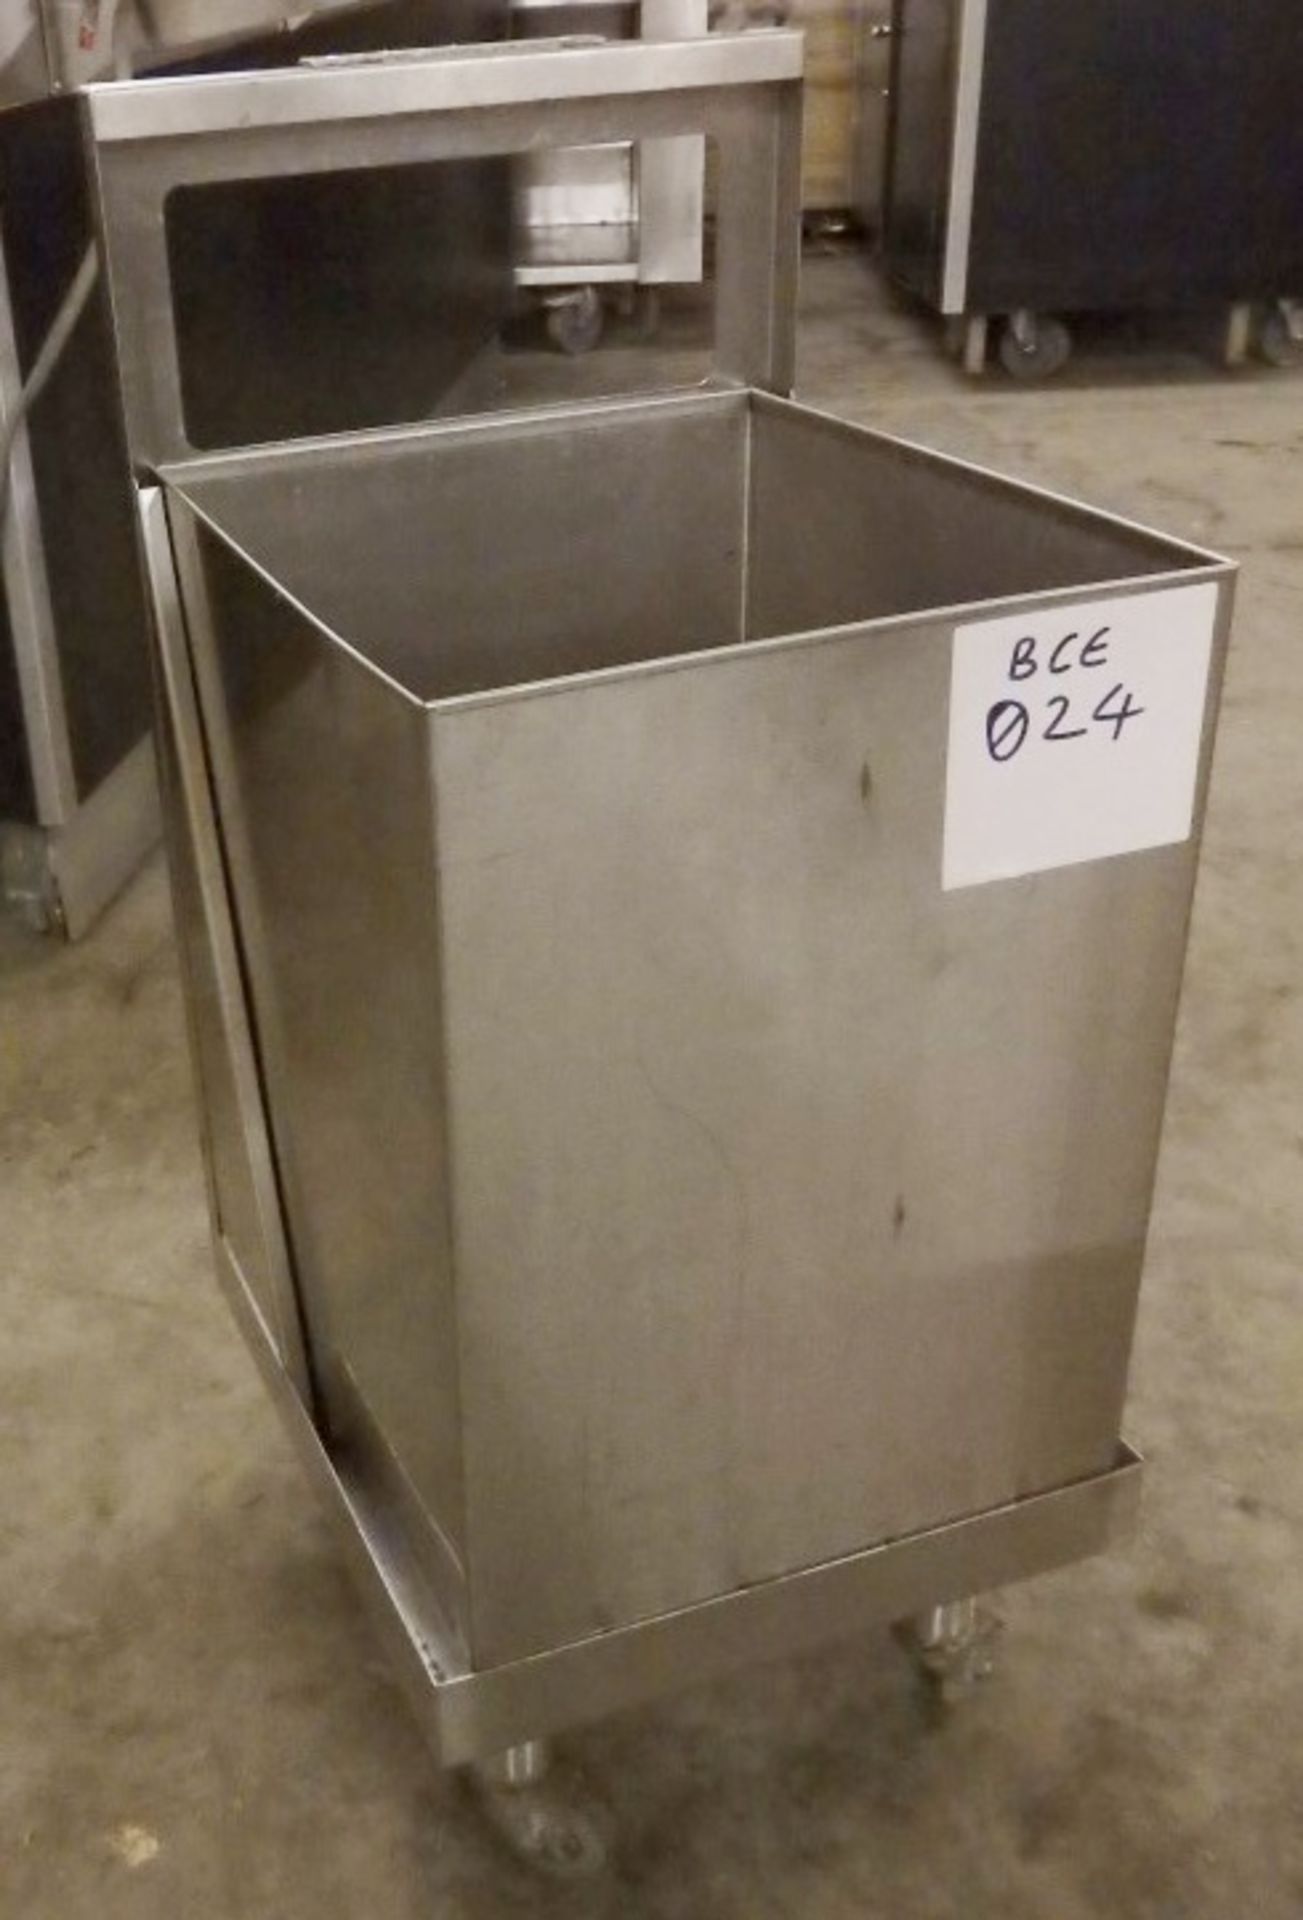 1 x Stainless Steel Under The Counter Storage Container On Weeled Base - Lifts Out From Base For